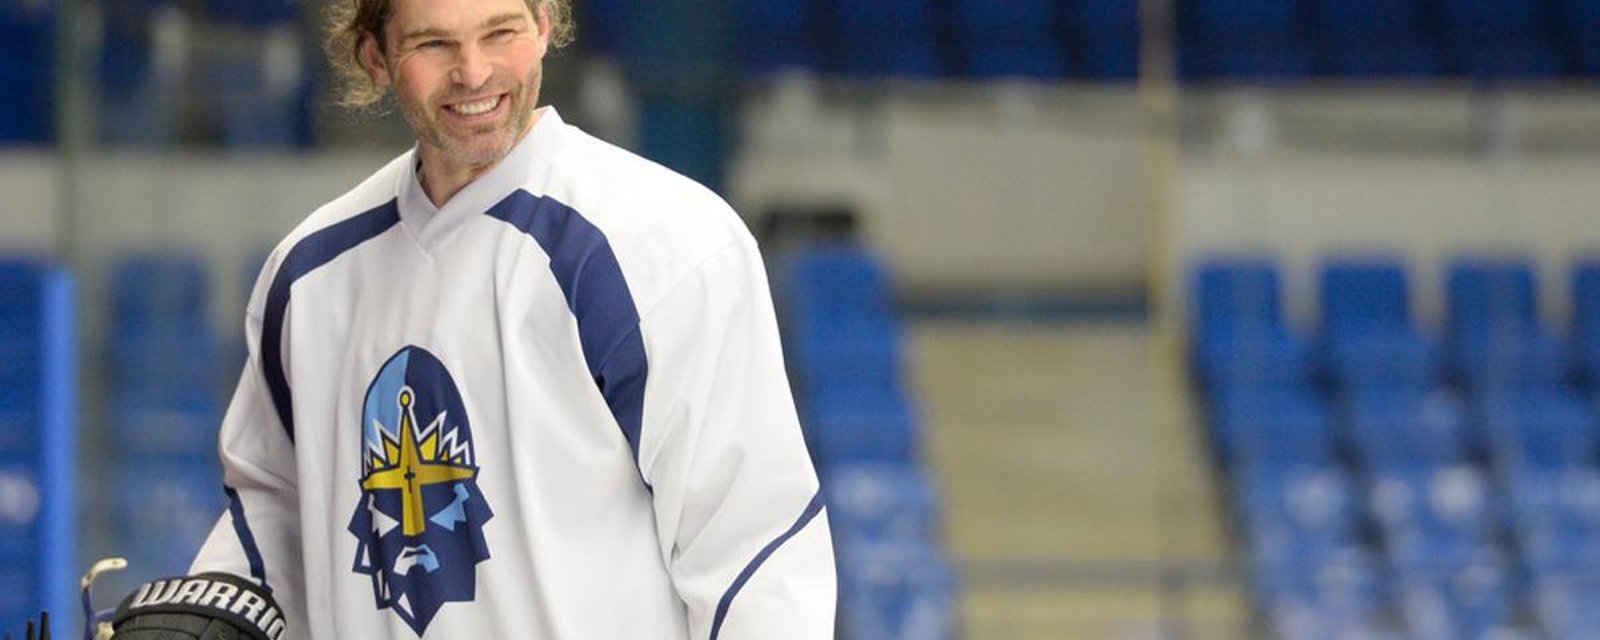 Jaromir Jagr showed he still has it in his first game with Kladno